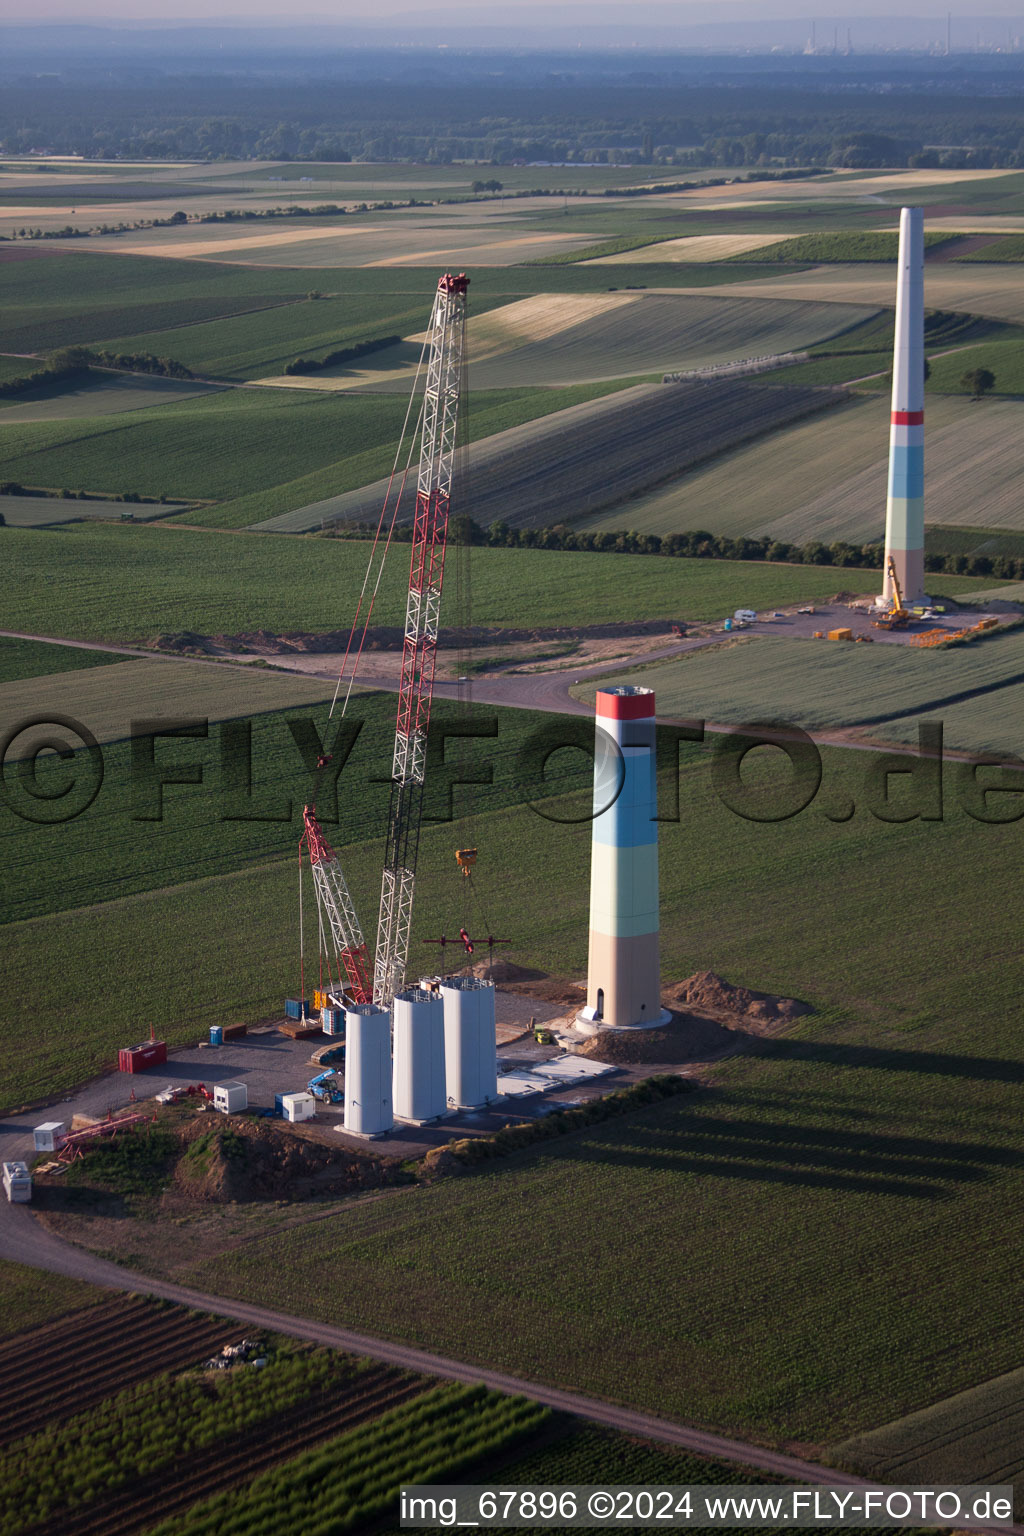 New wind farm in Offenbach an der Queich in the state Rhineland-Palatinate, Germany from a drone